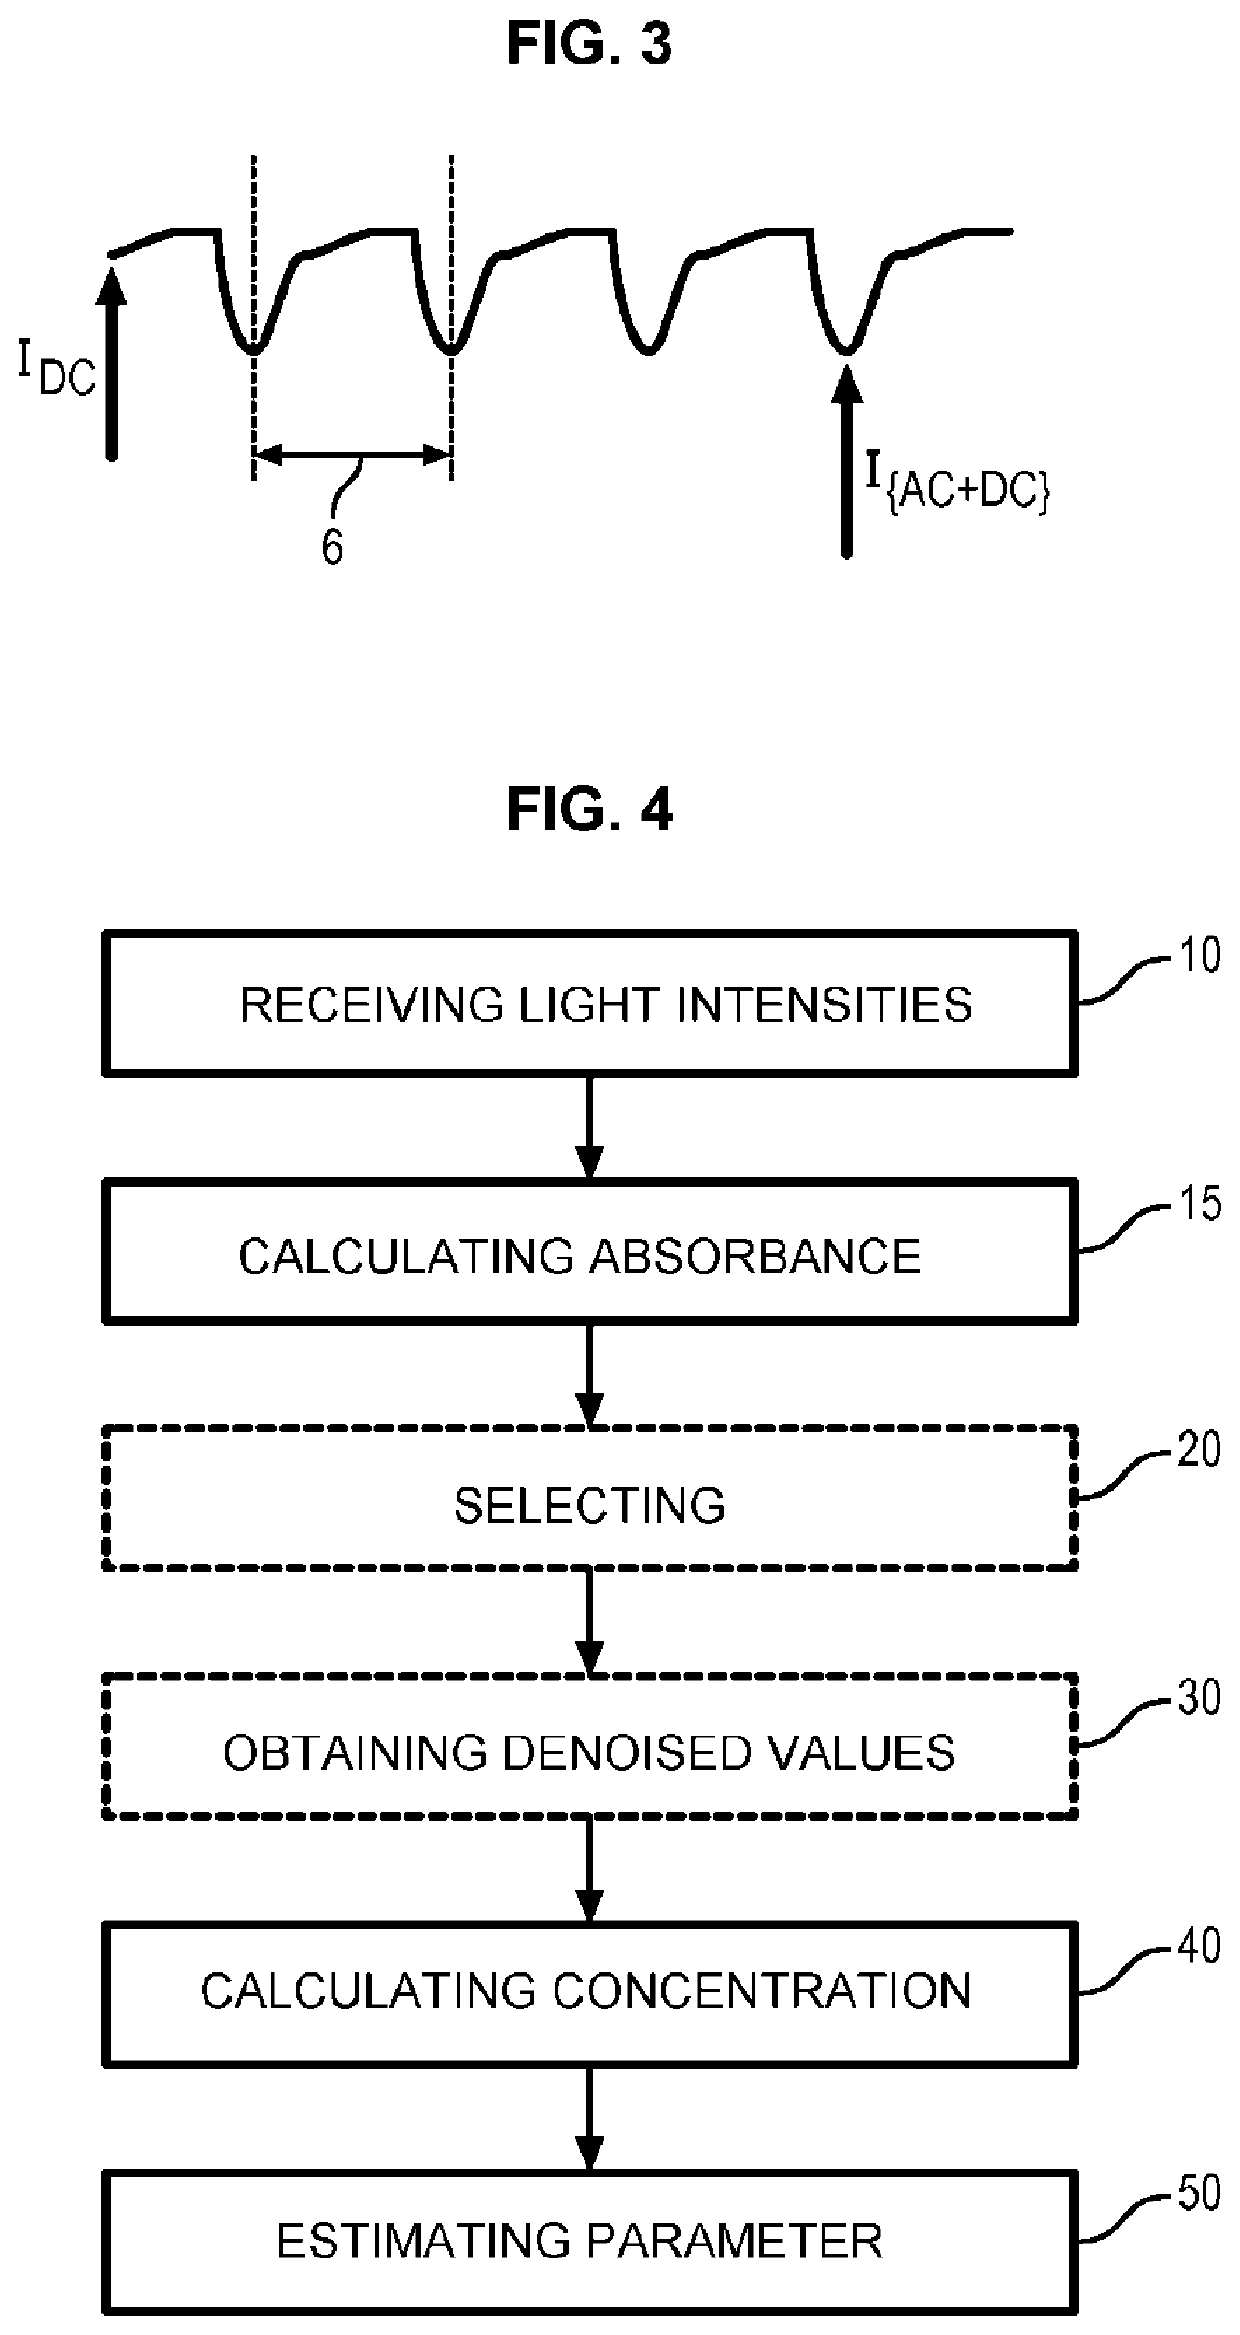 Non-invasive measurement device and method for estimating local metabolic parameters